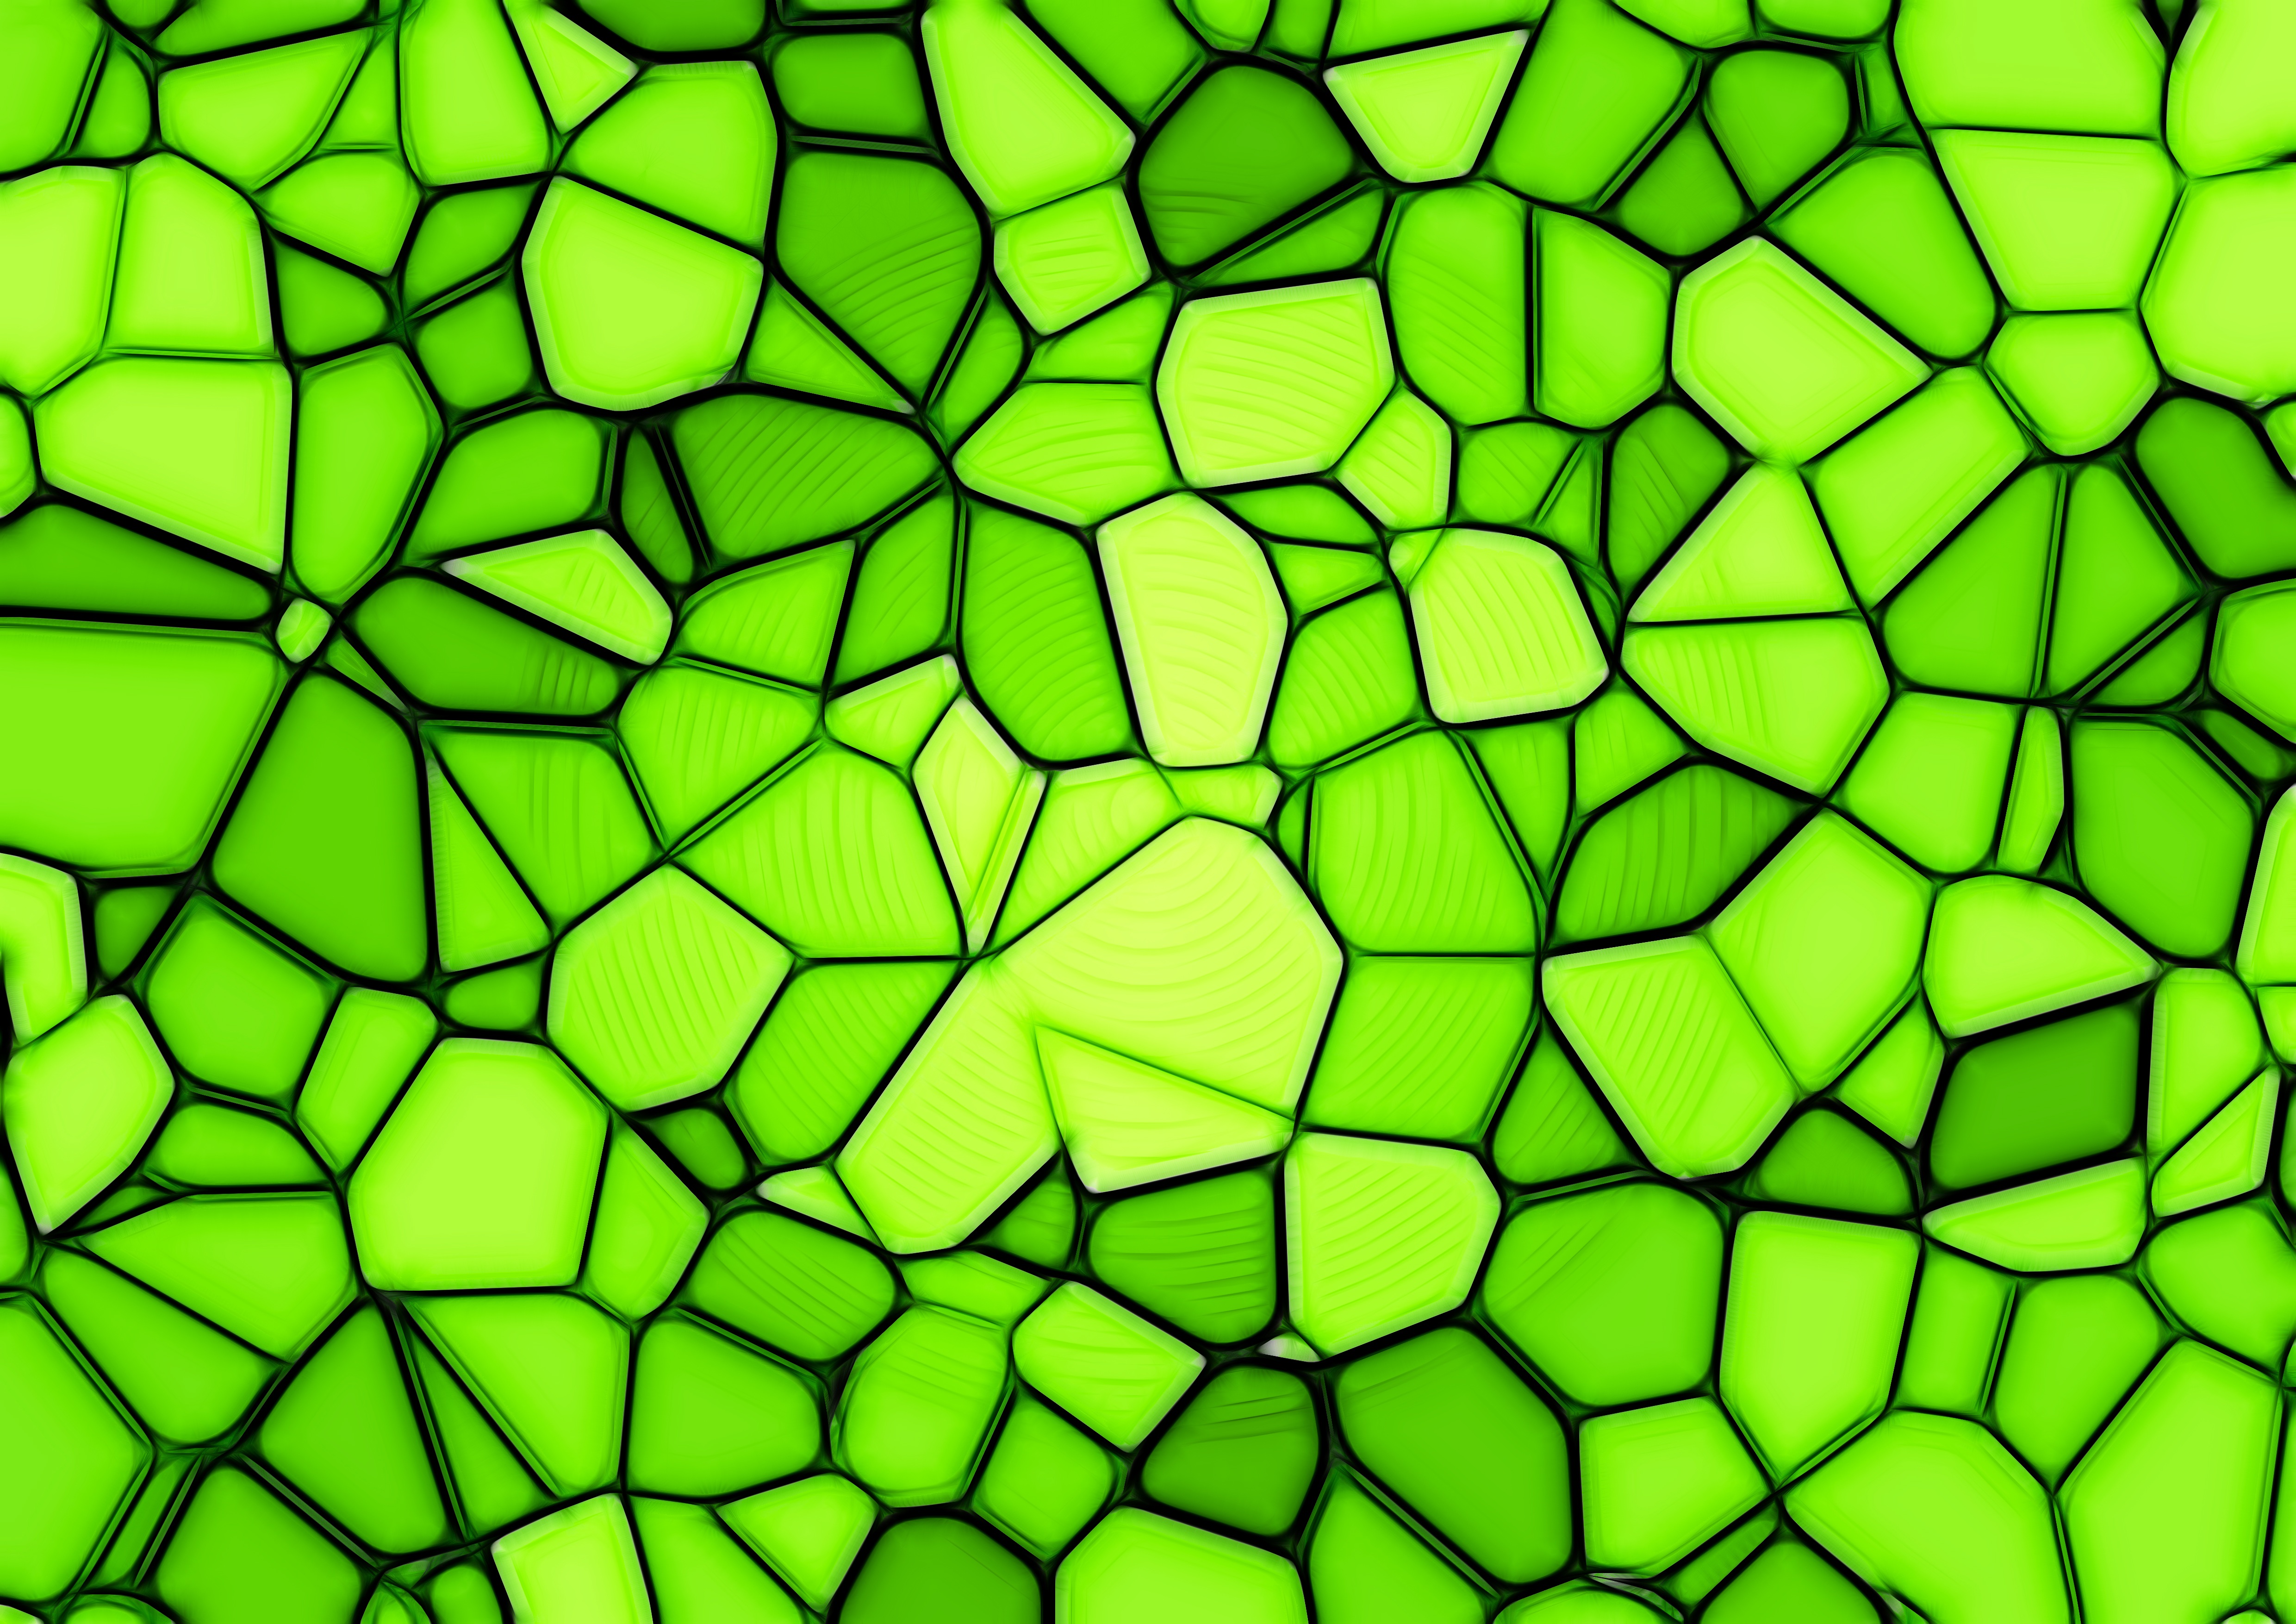 green, light green, texture, textures, triangles, salad, squares